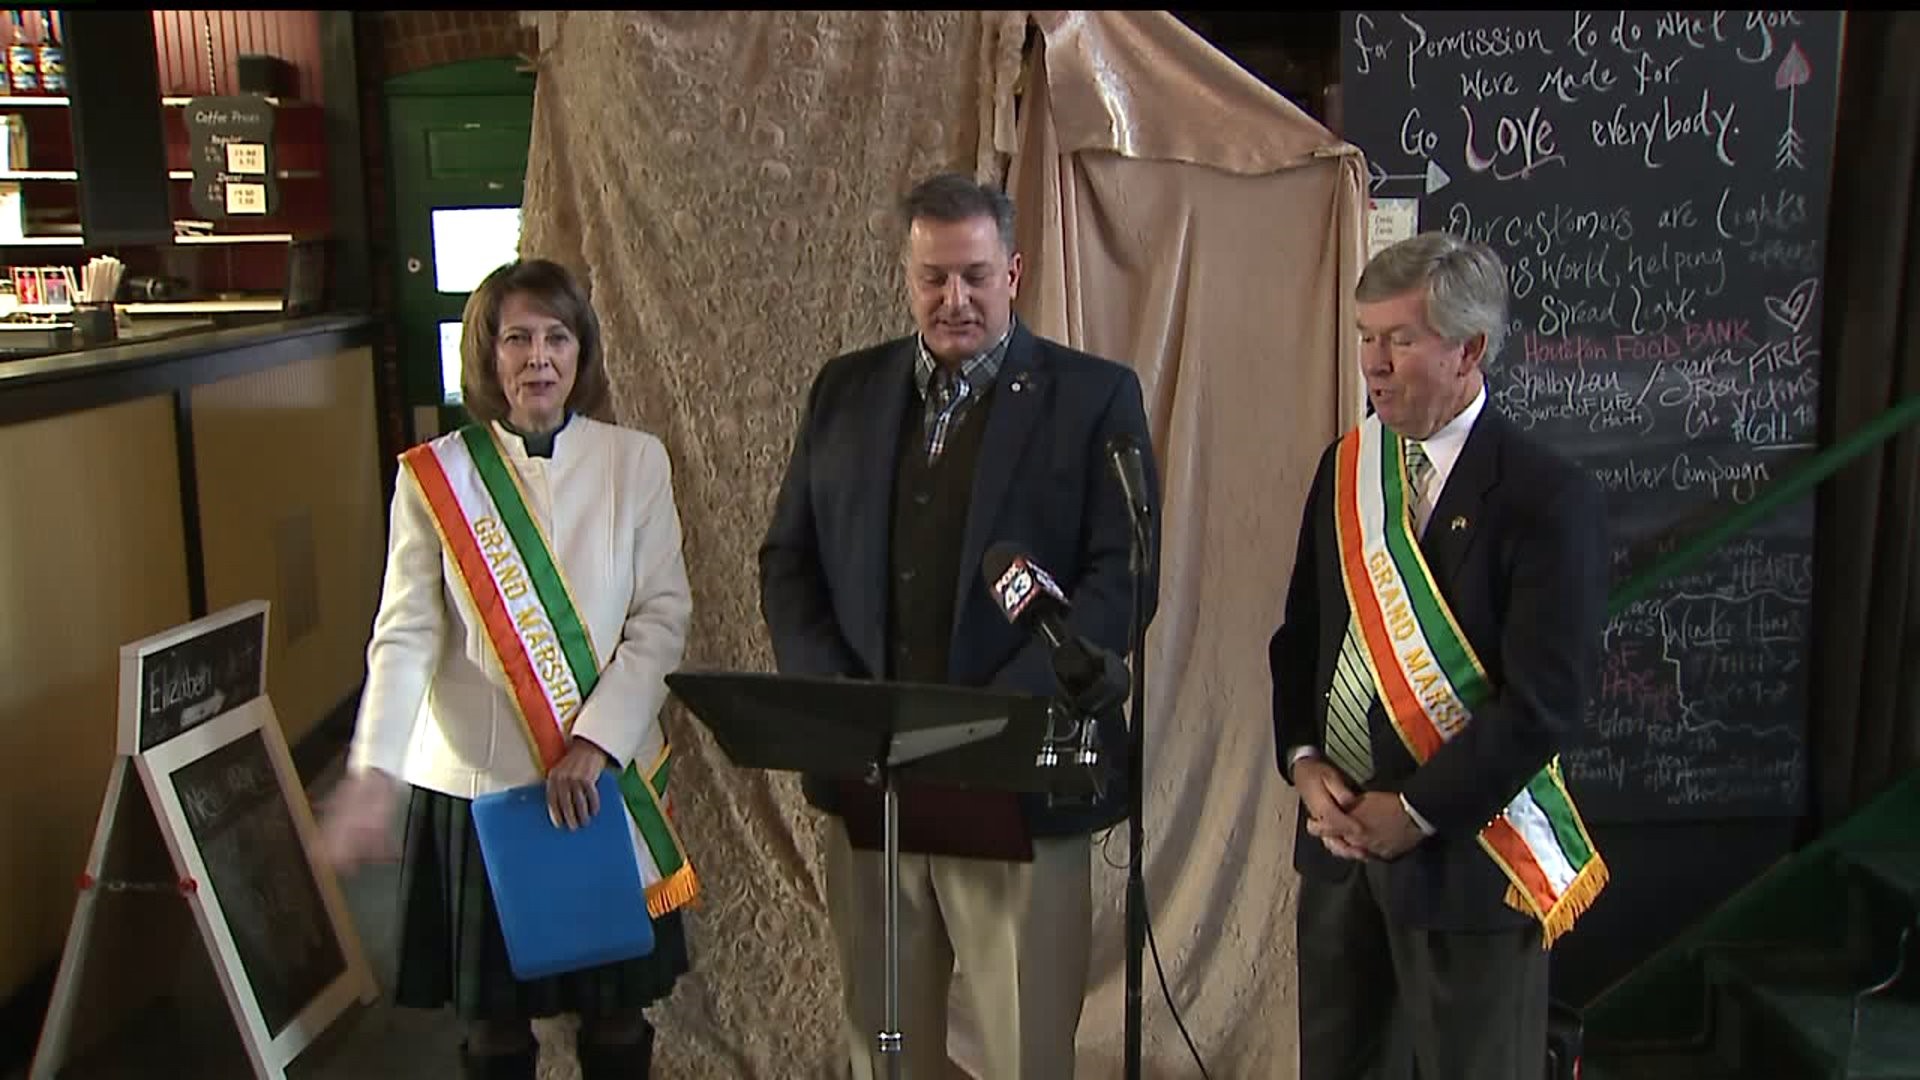 York City St. Patrick Day announcement